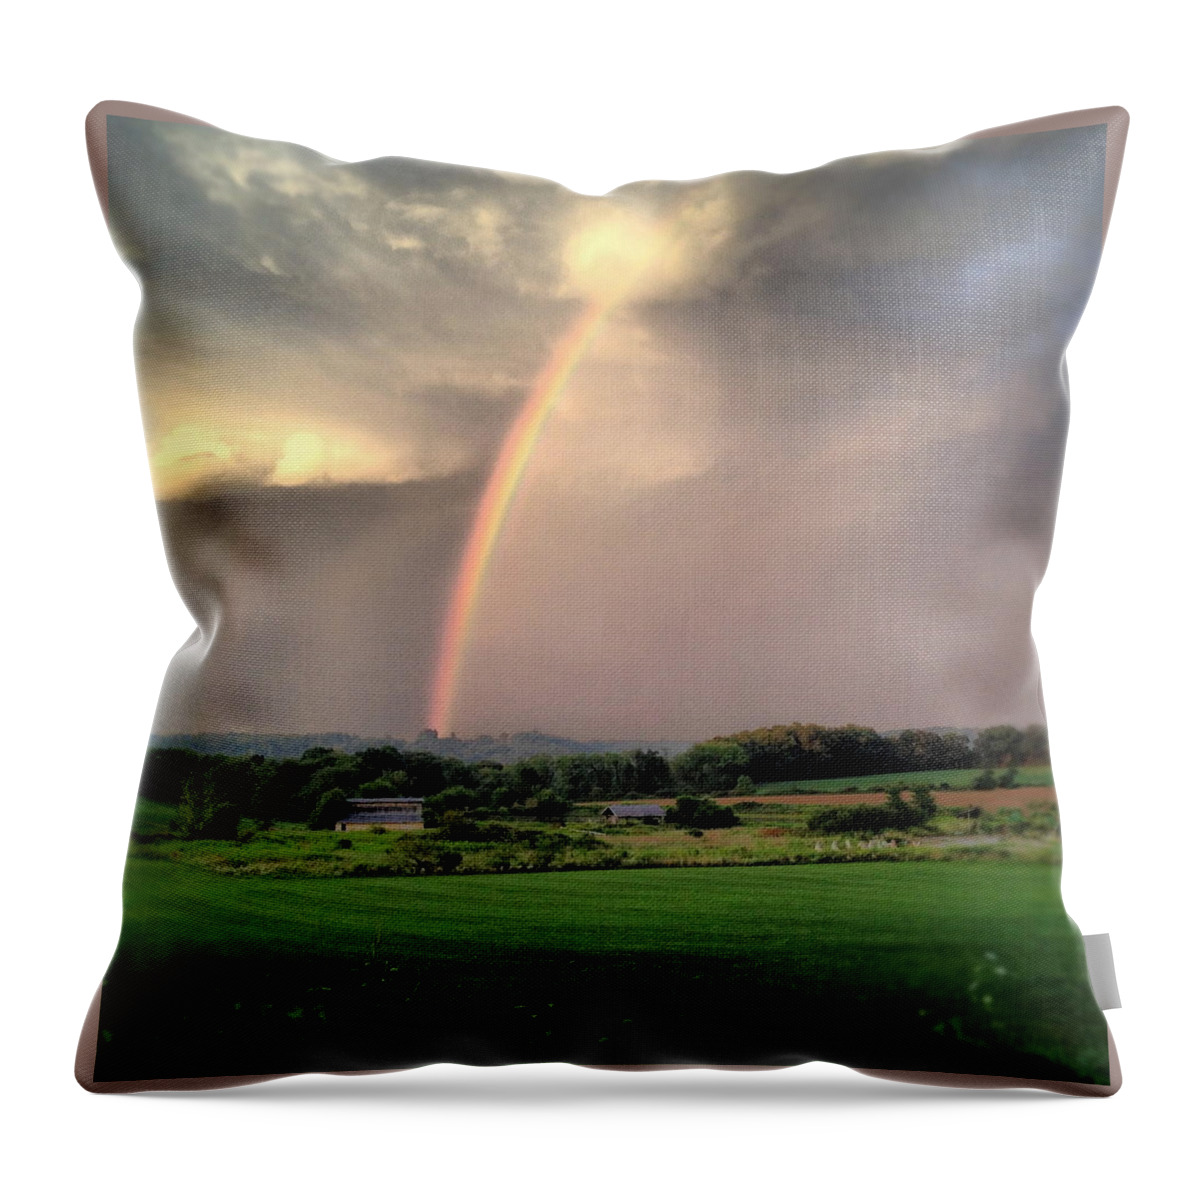 Rainbow Throw Pillow featuring the photograph Rainbow Poured Down by Angela Rath